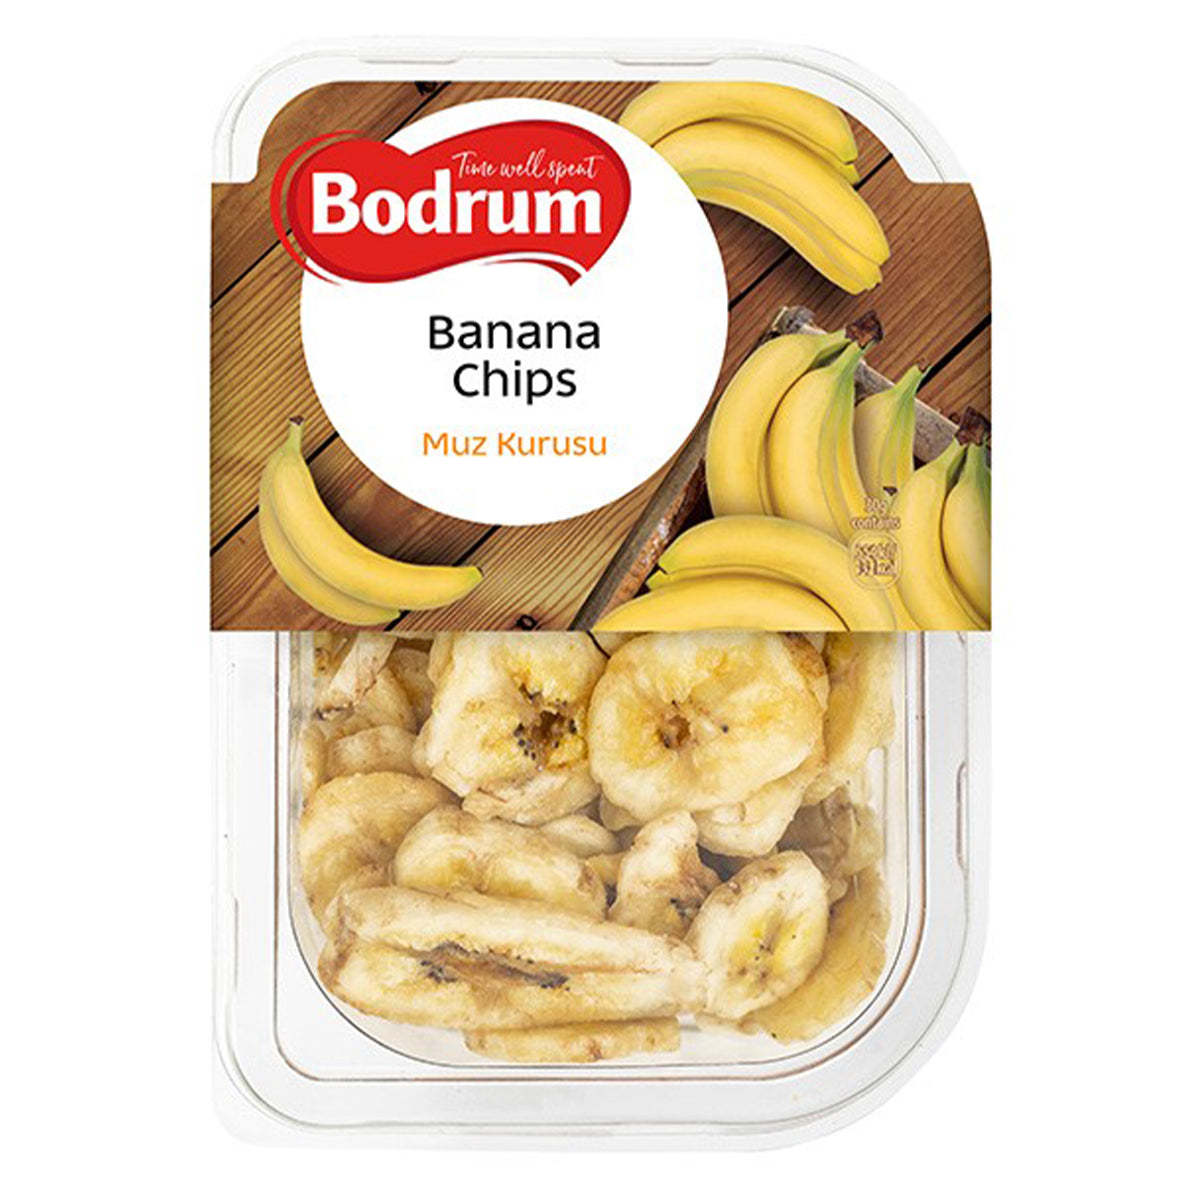 Continental Food Store - Bodrum Banana Chips - 200g in a plastic container.